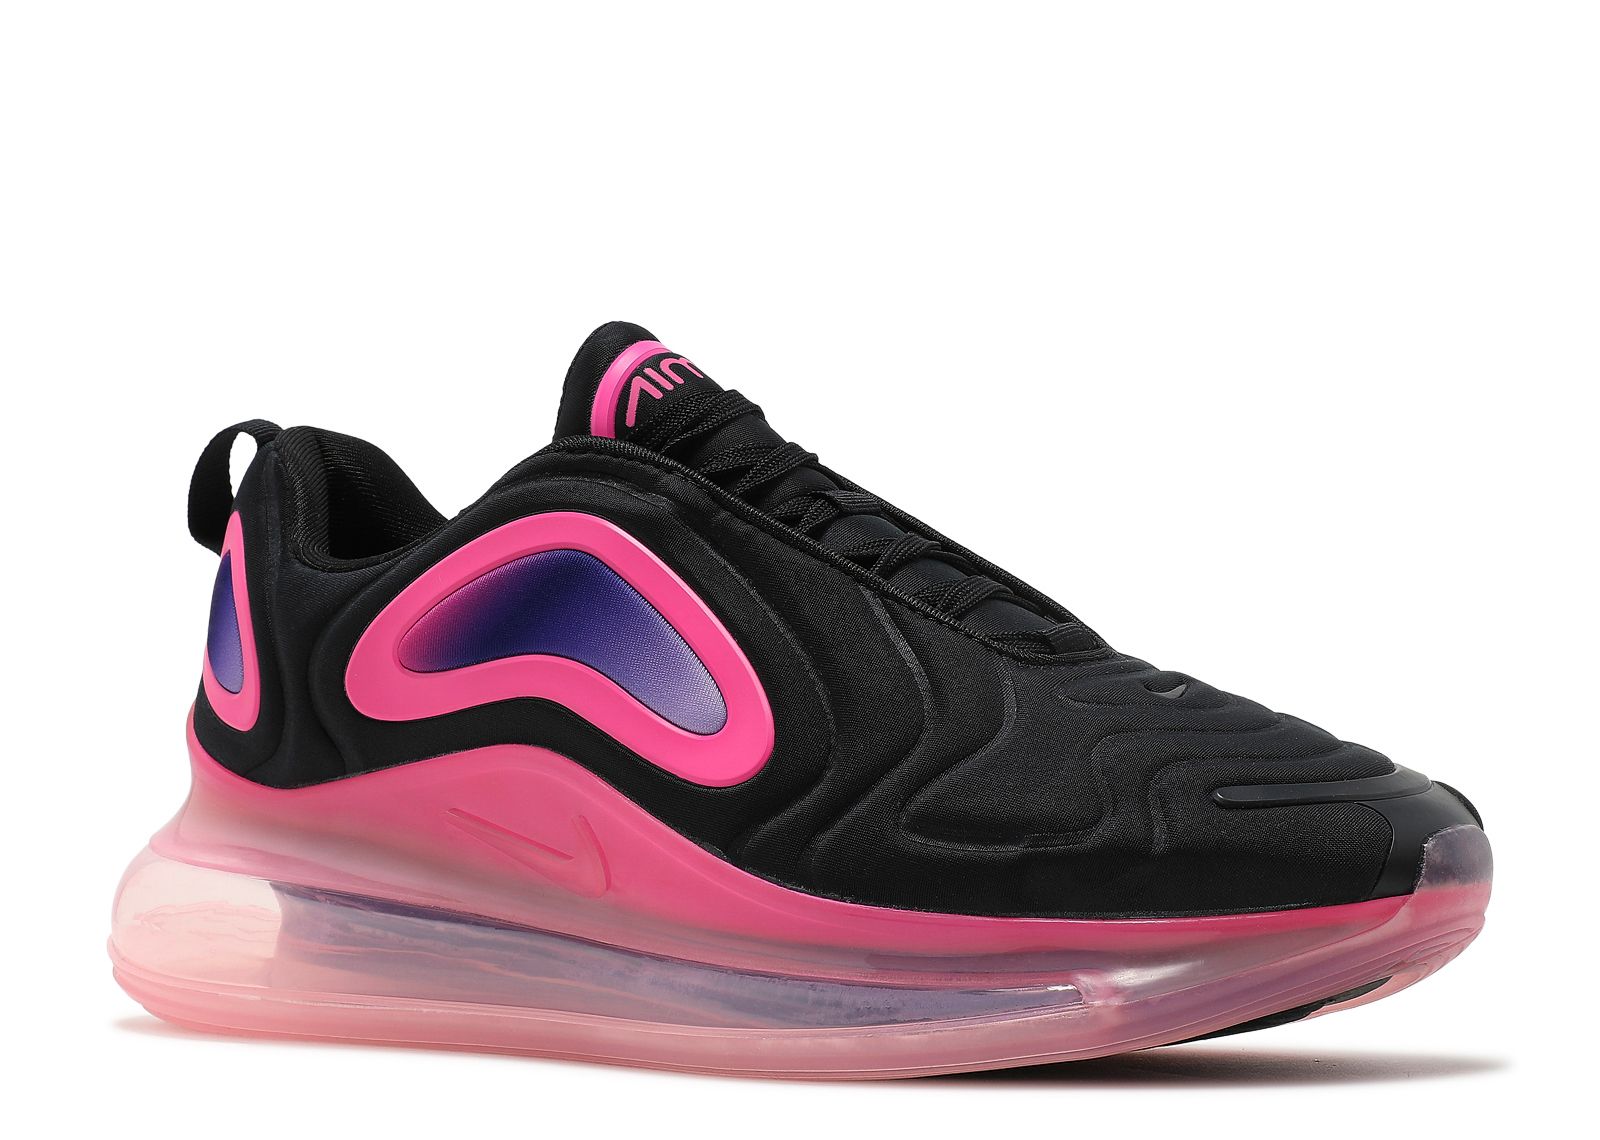 nike air max 720 purple and pink